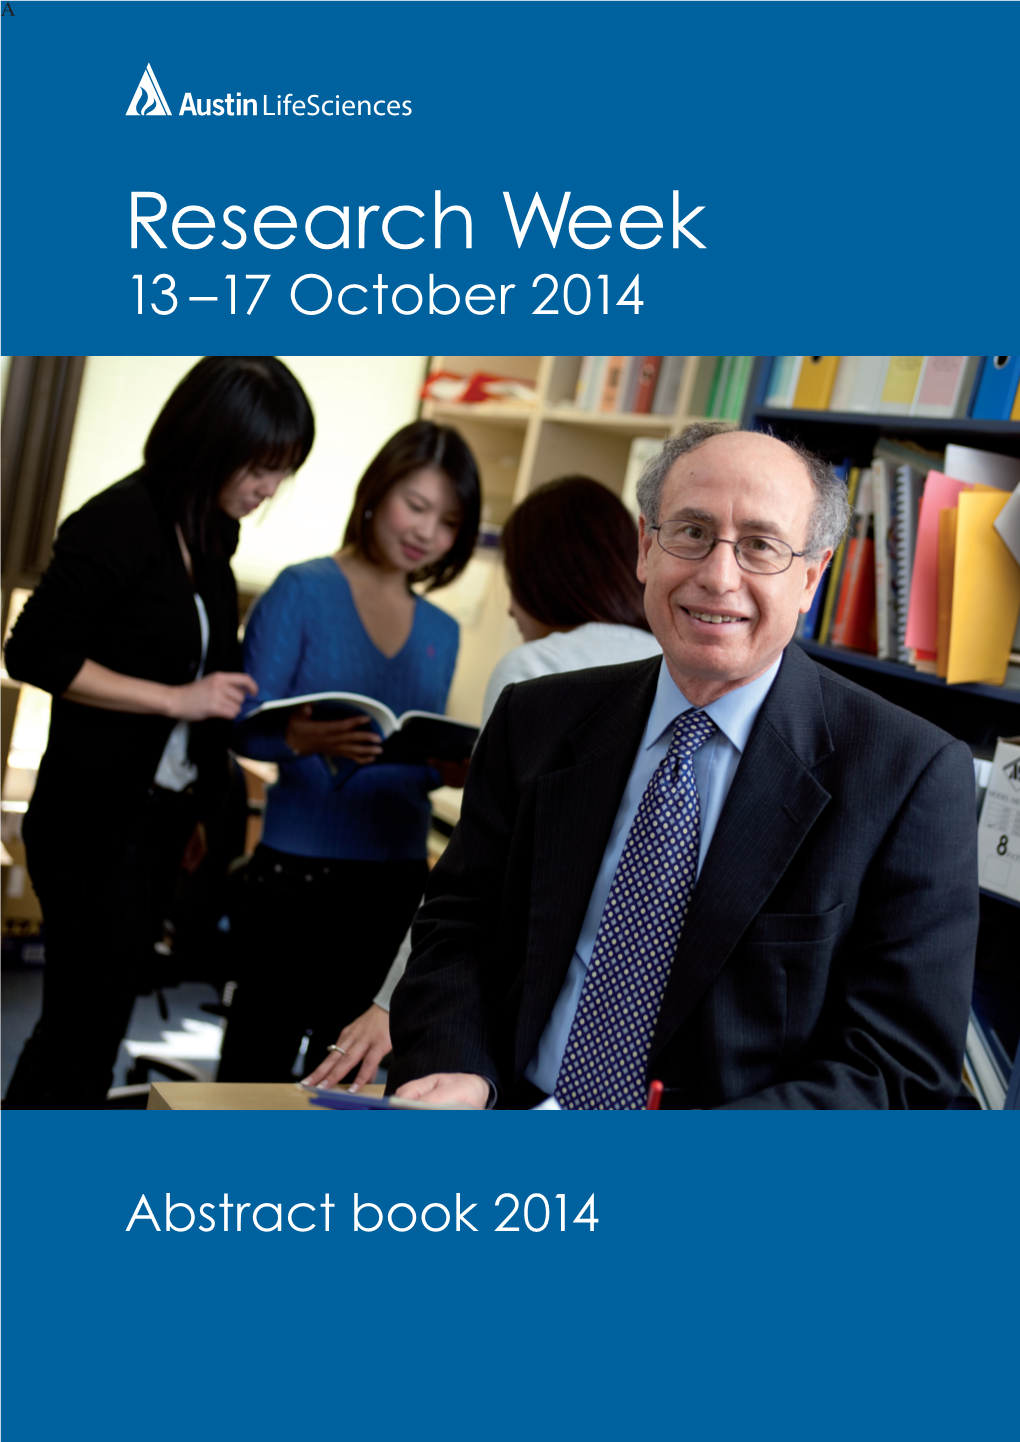 Austin Lifesciences Research Week 2014 Abstracts TUES01 Shoulder Pain Overnight After Stroke: an Observational Study